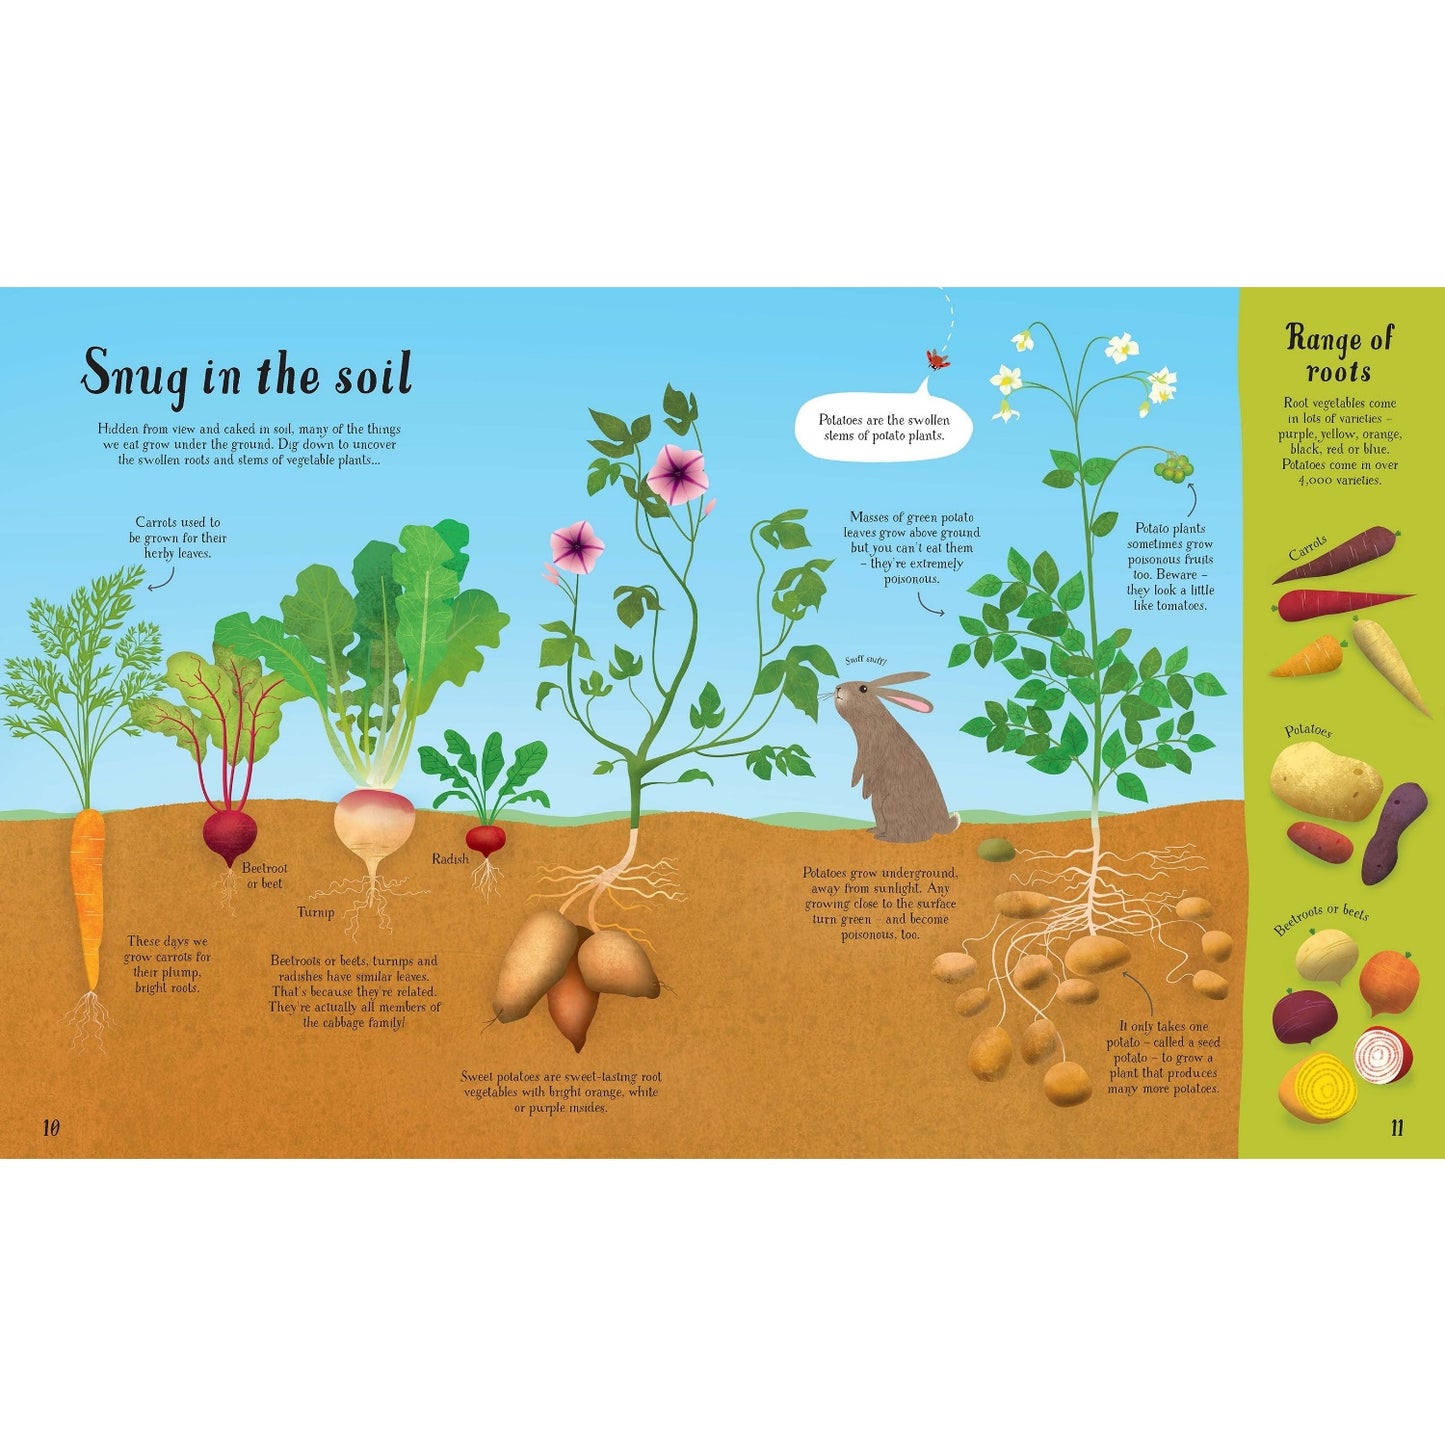 It All Starts with a Seed... | Hardcover | Children's Book on Gardening